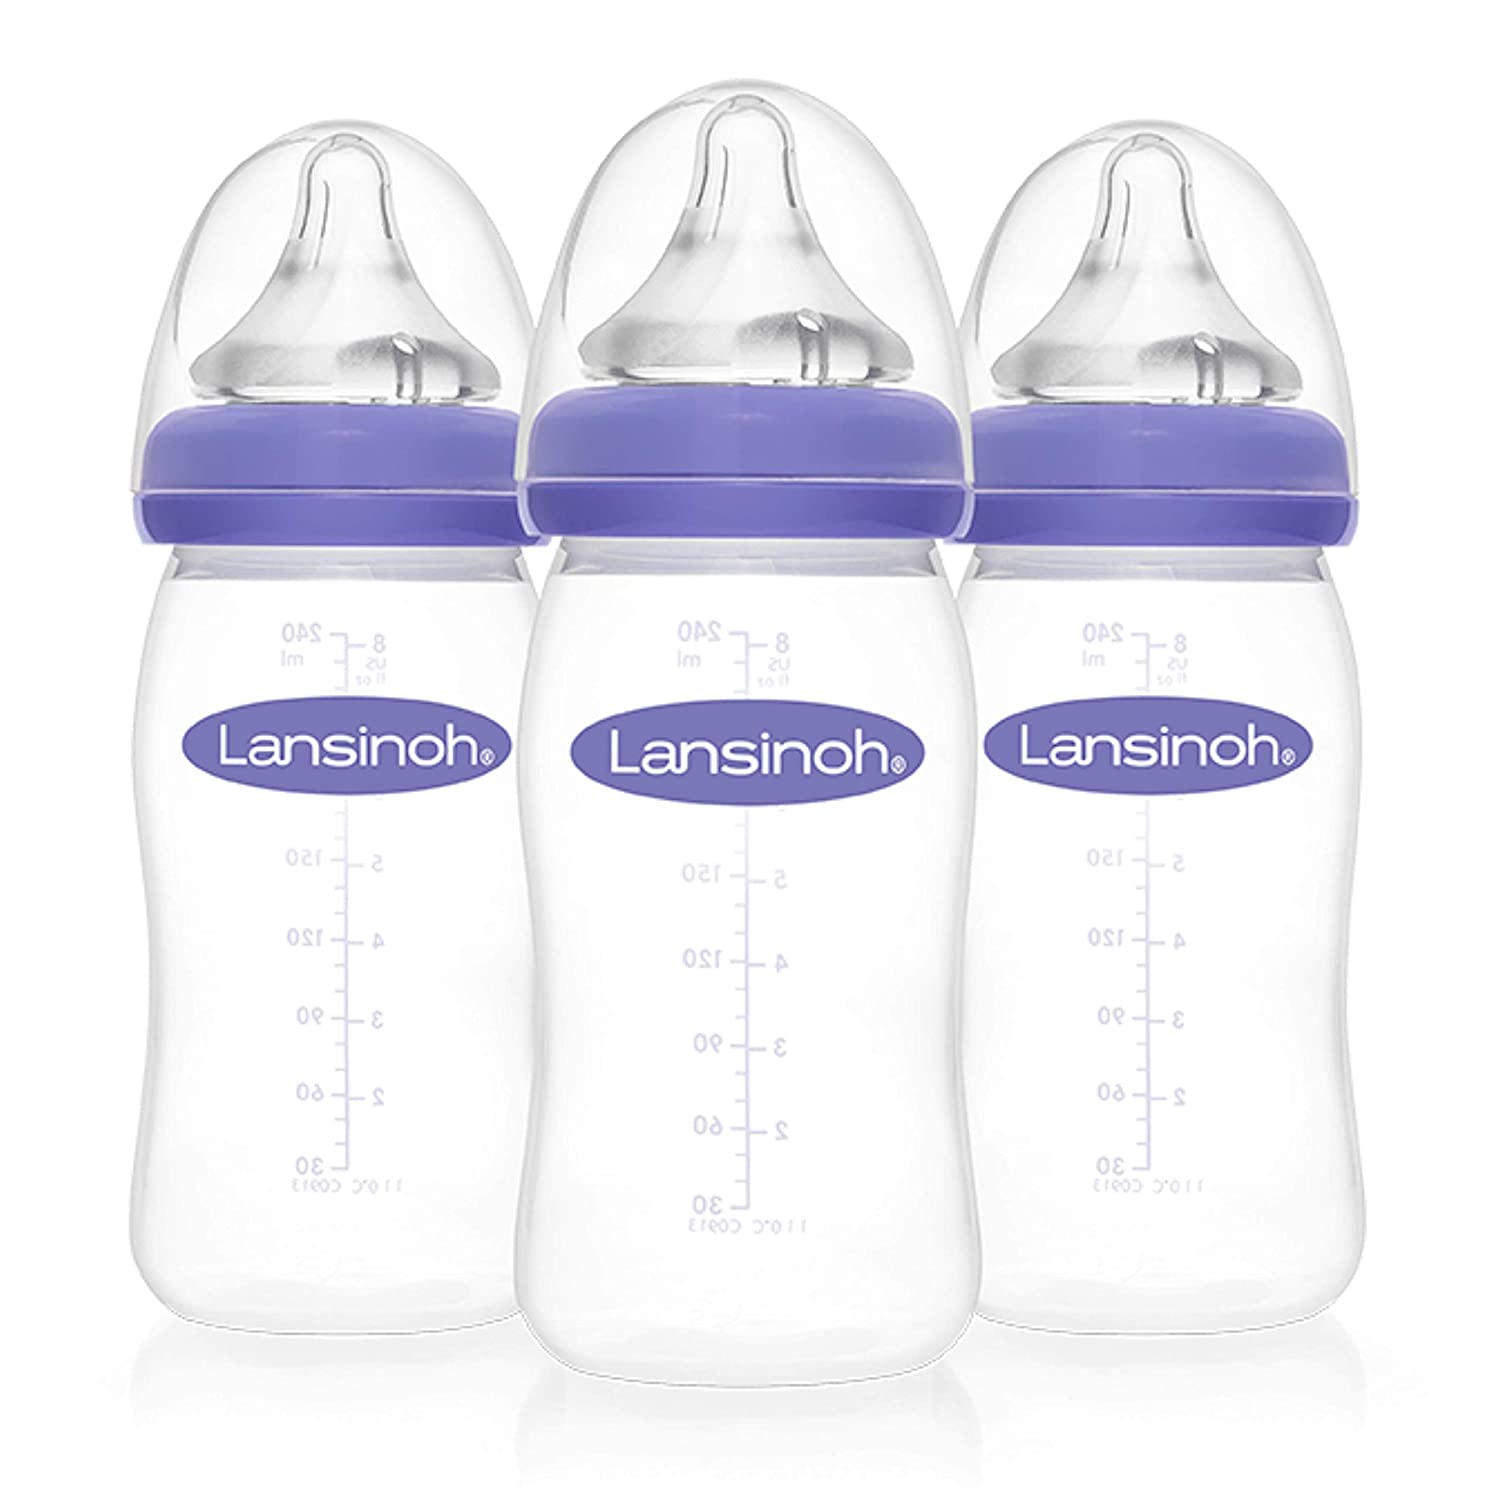 Lansinoh Baby Bottles for Breastfeeding Babies, 8 Ounces, 3 count 3+months